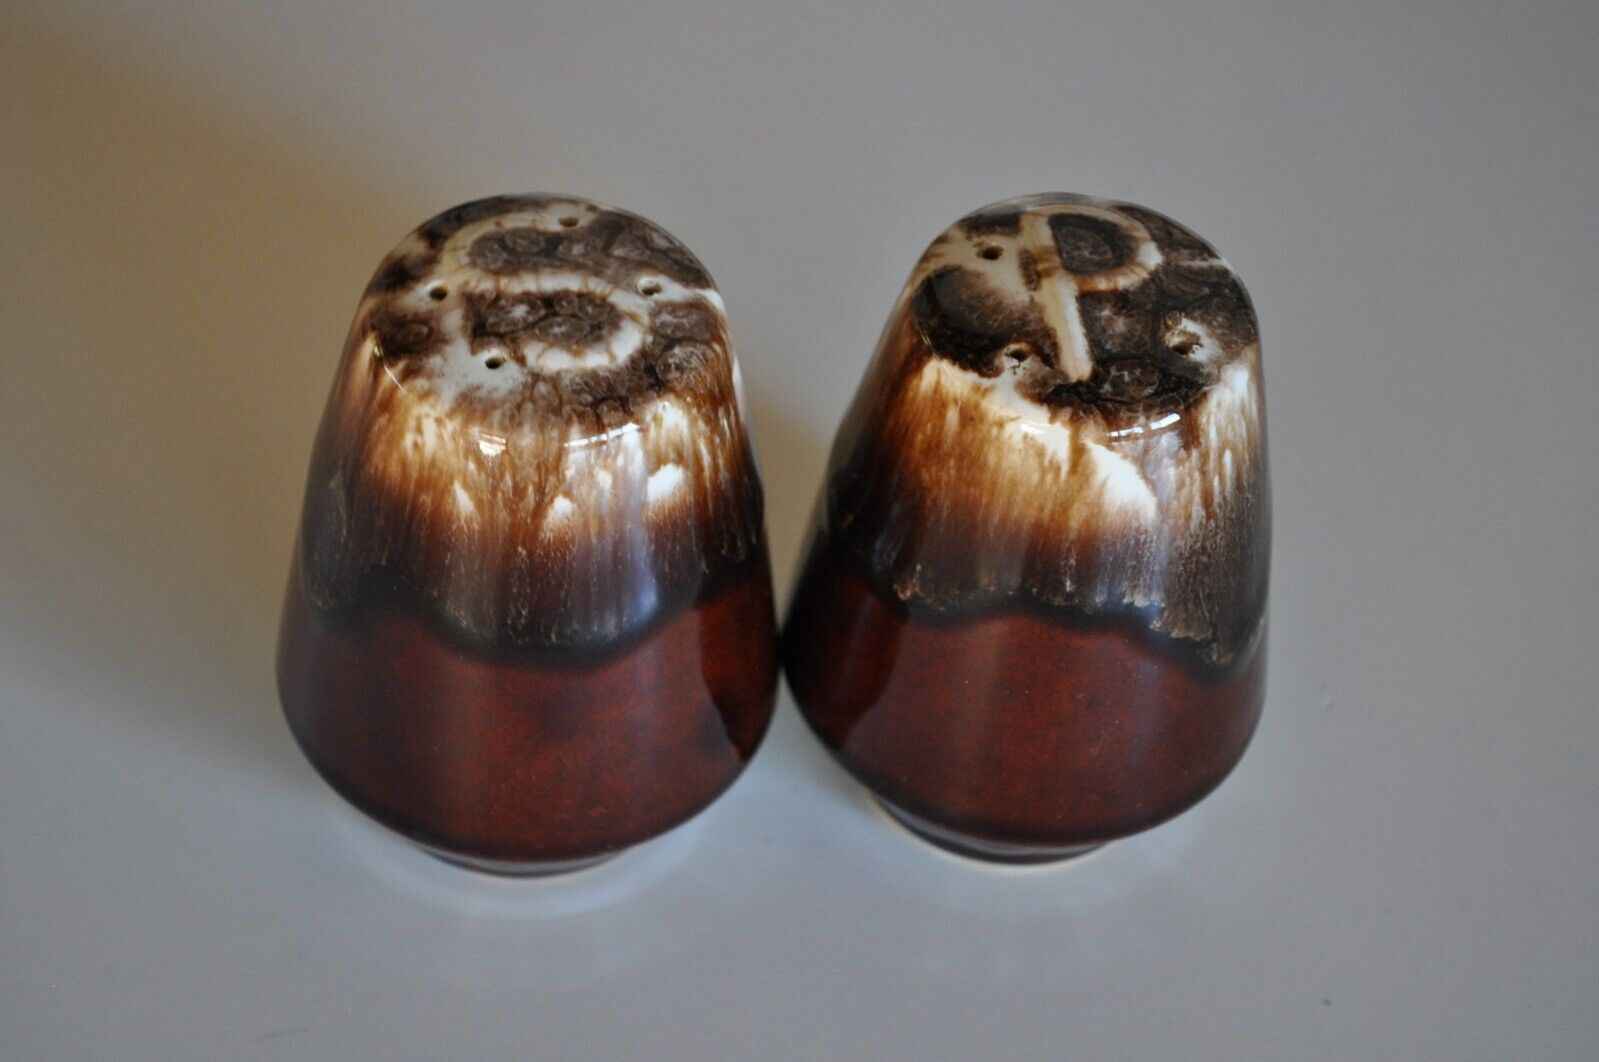 Vintage Hull Salt and Pepper Shakers Brown Drip Glaze Classic for Fall Season